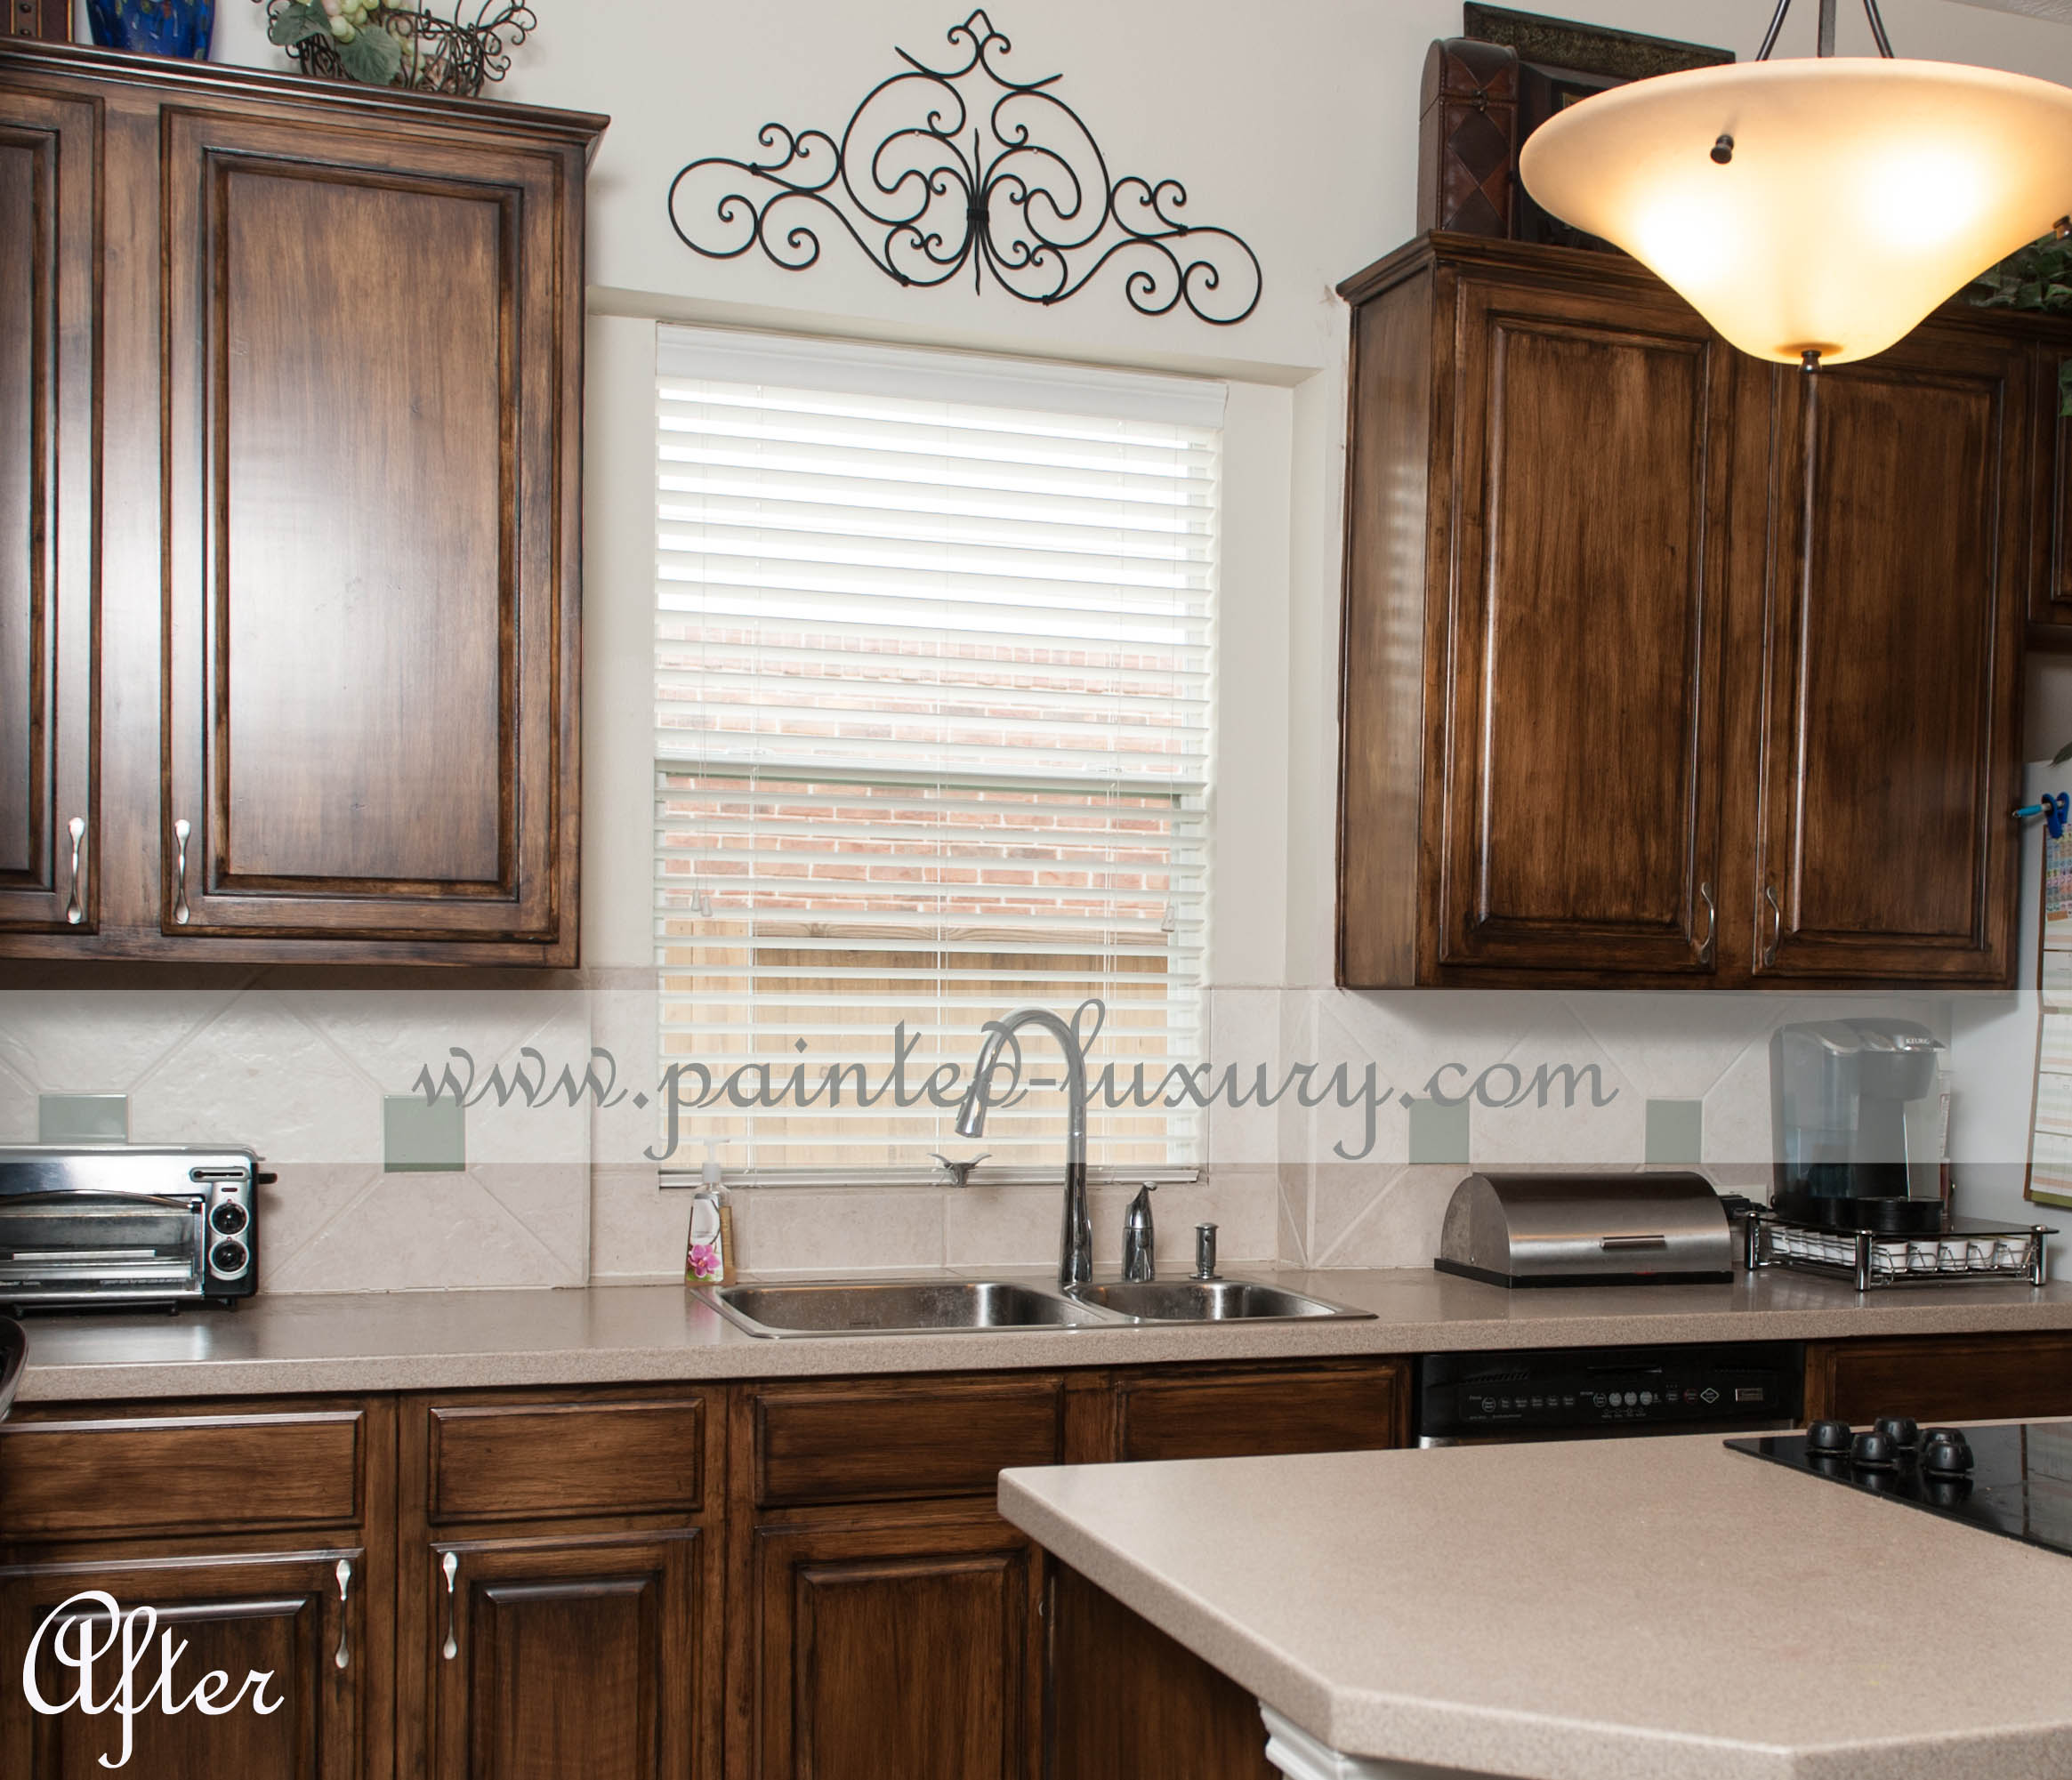 Painted Luxury Specializing In Cabinet Refinishing And Faux Painting